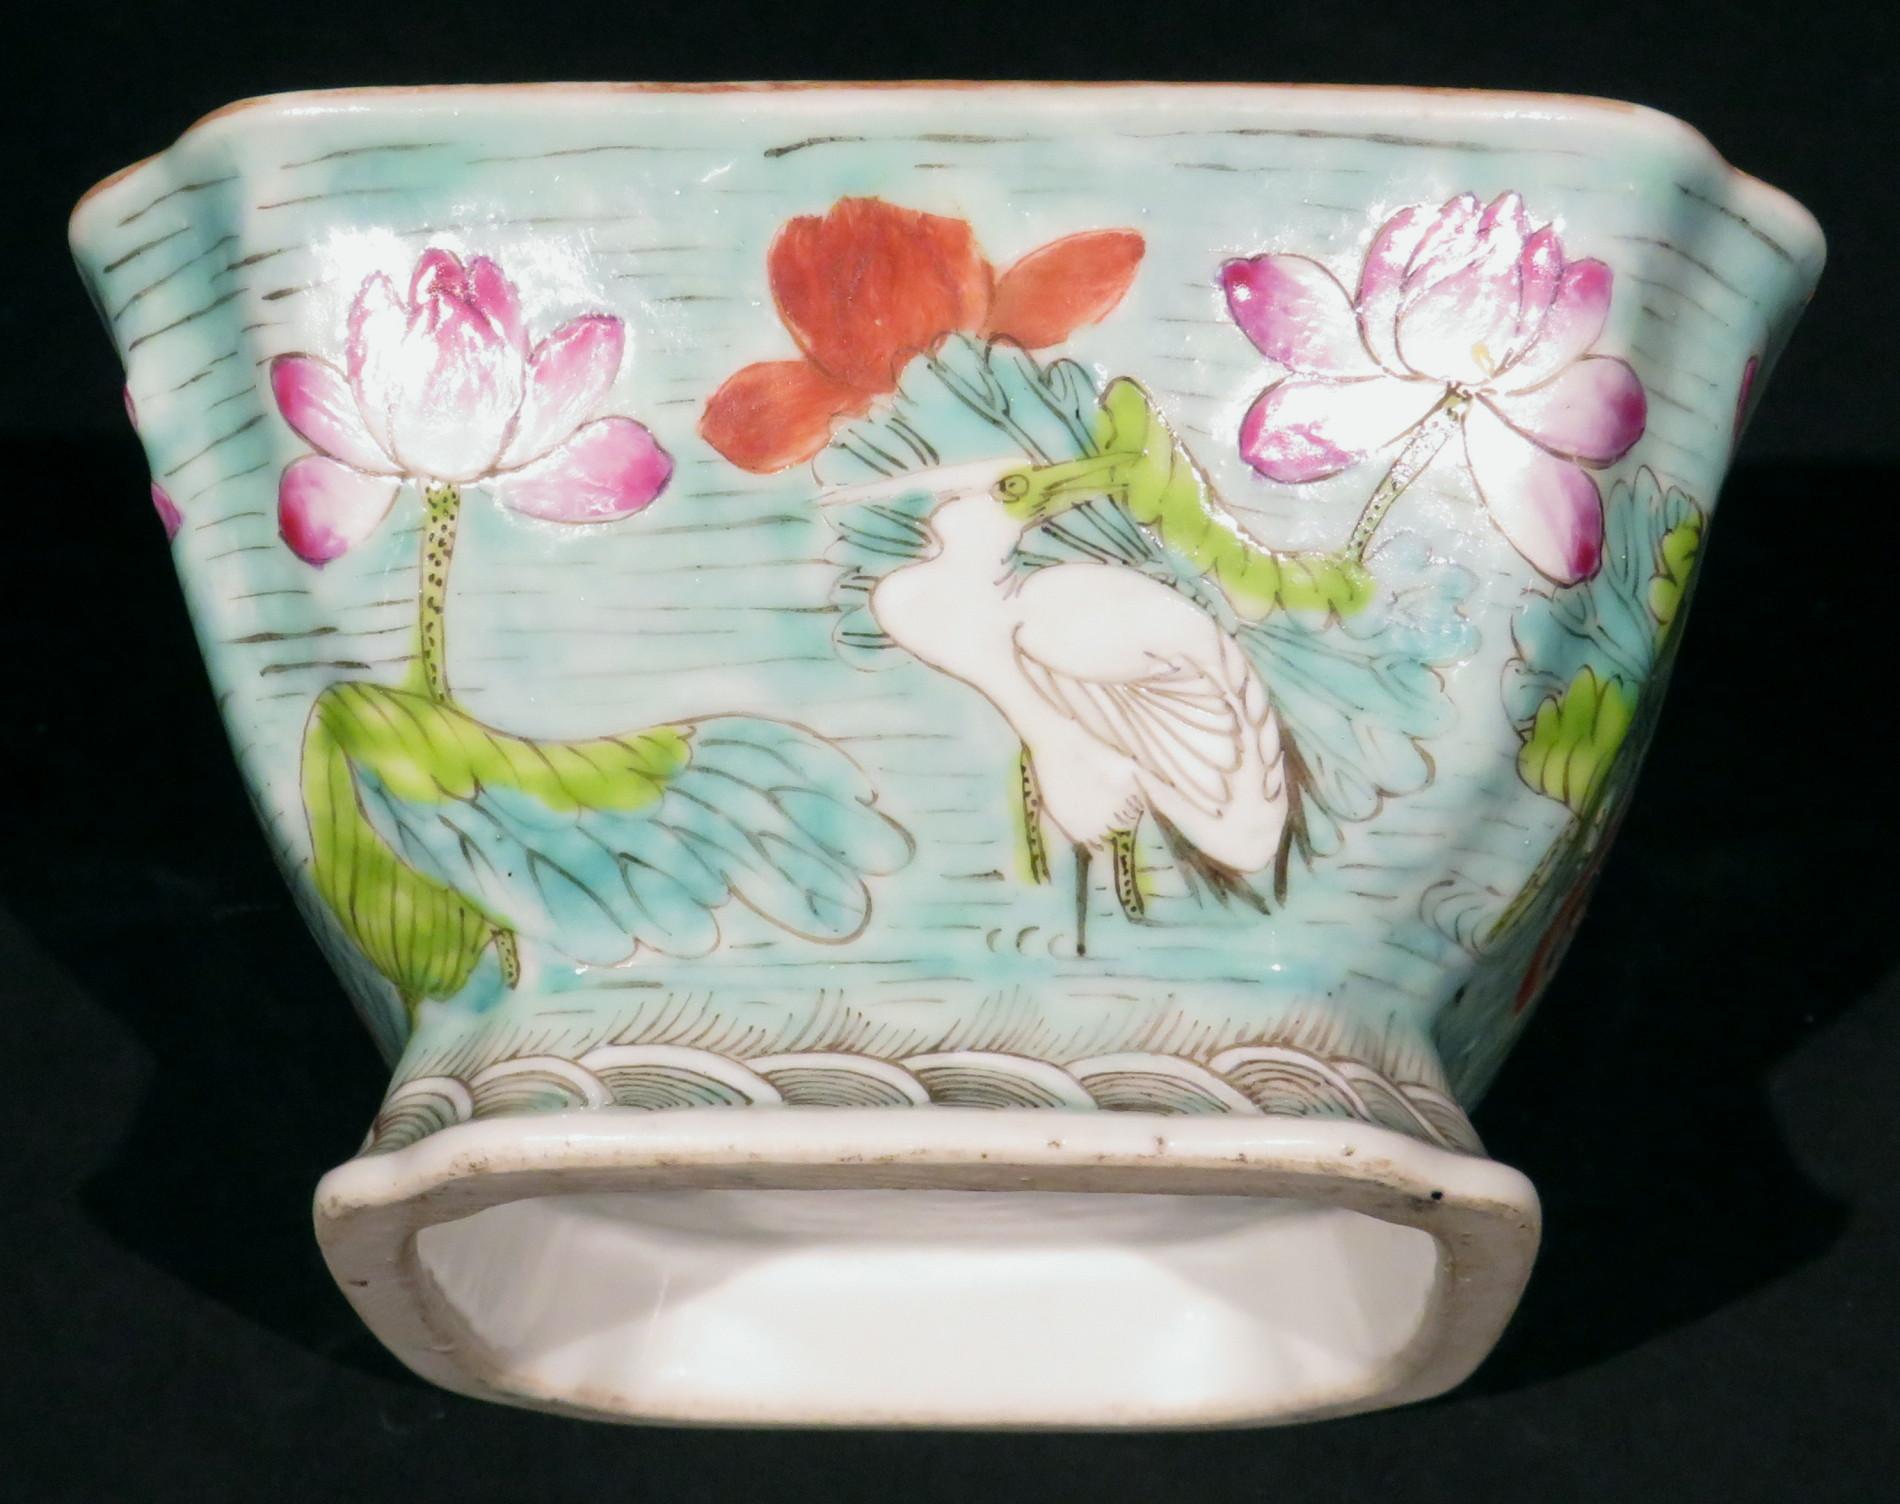 20th Century A Chinese Export Enamelled Porcelain Bowl, Qing Period Circa 1900